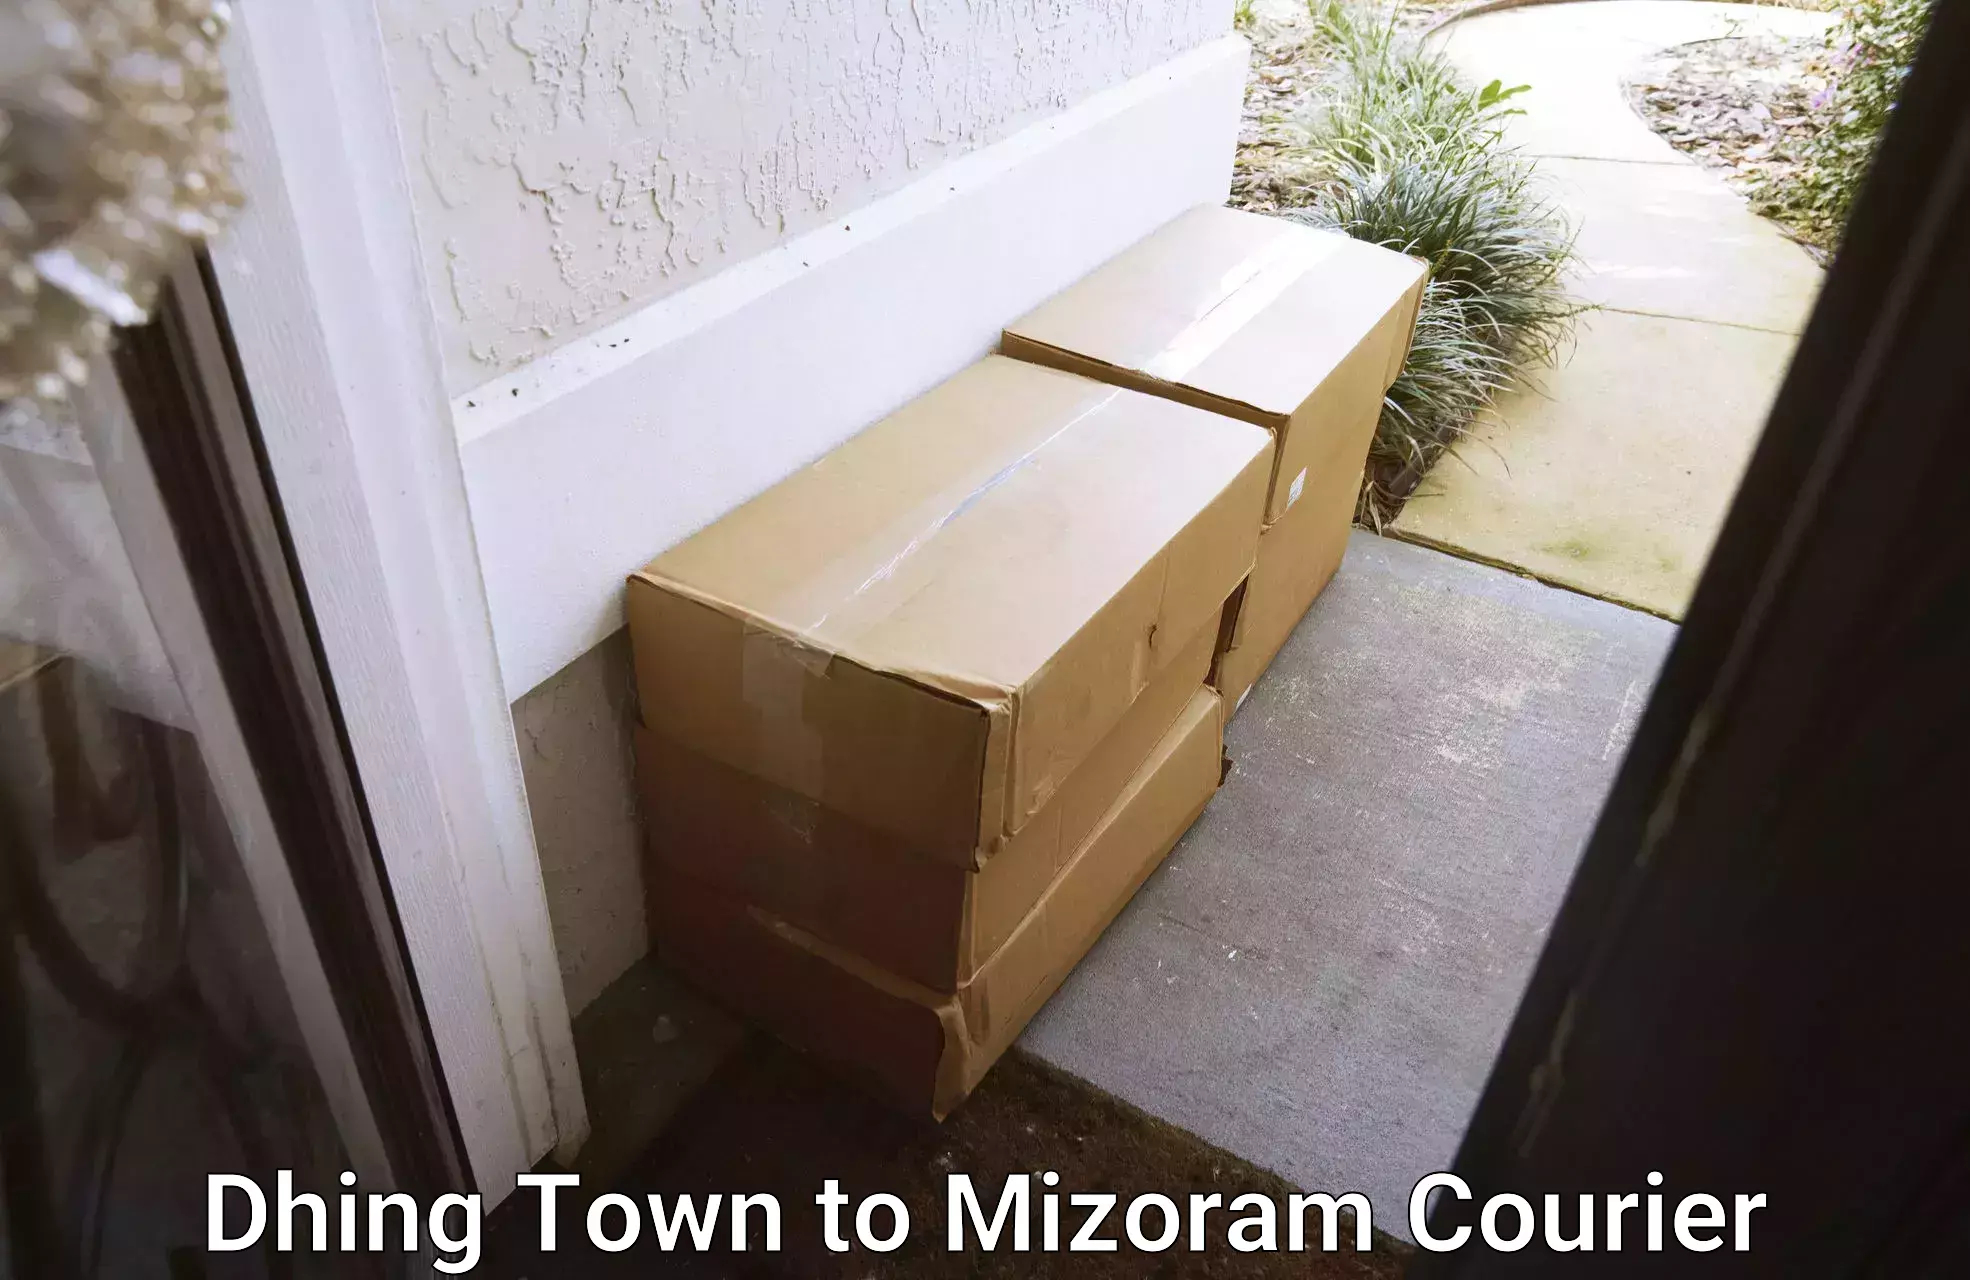 Automated parcel services Dhing Town to Mizoram